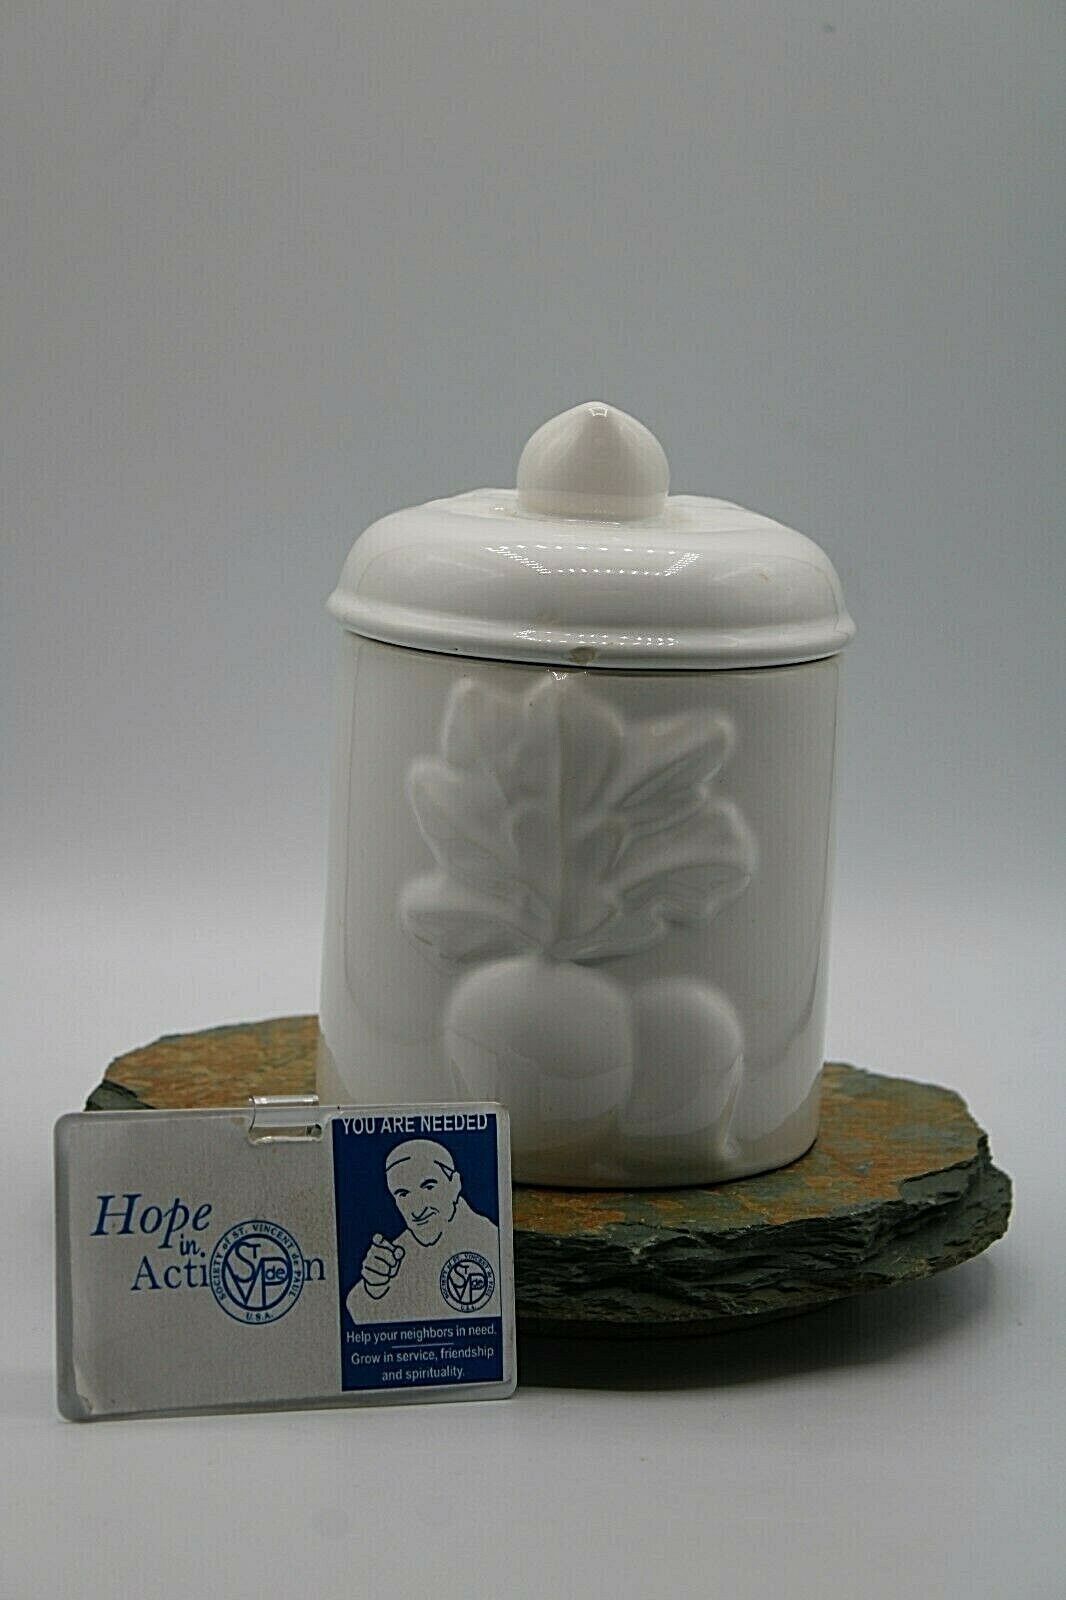 Over And Back Inc Ceramic White Embossed Lidded Canister 6" High